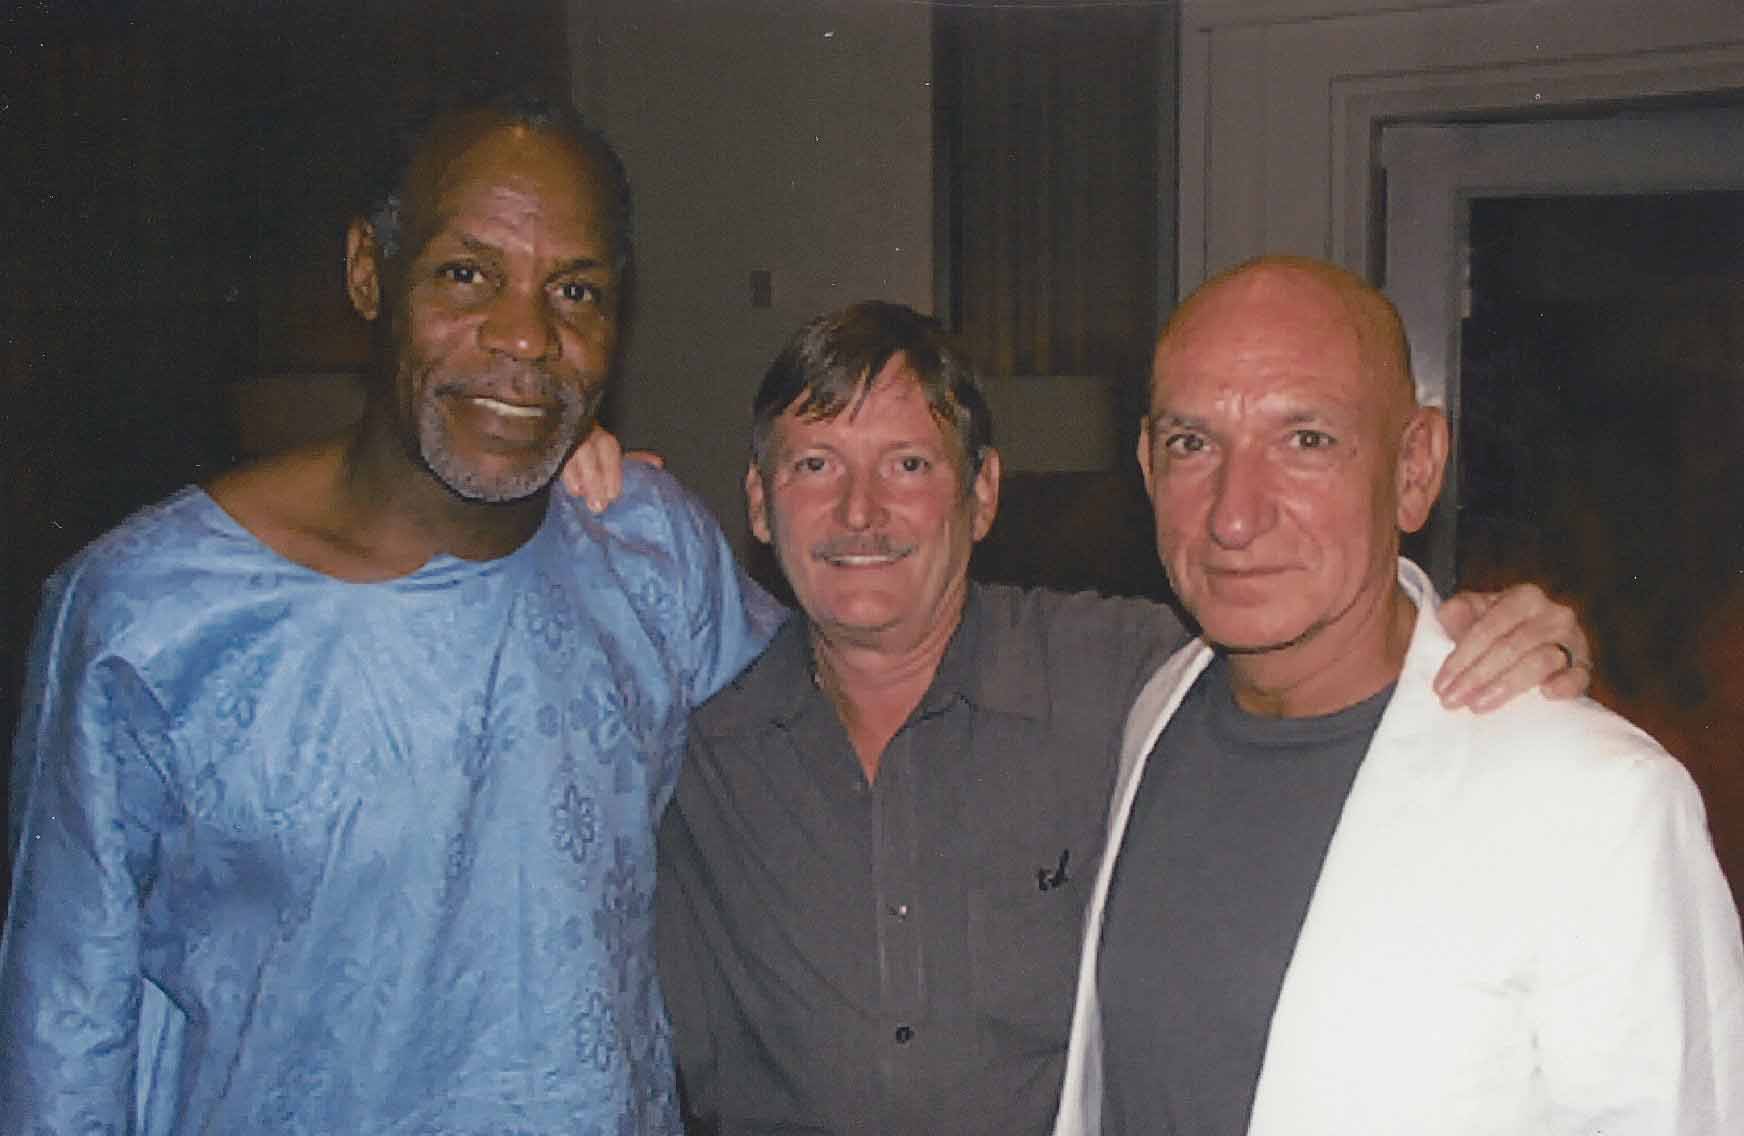 KMc with Danny Glover and Sir Ben Kingsley in 